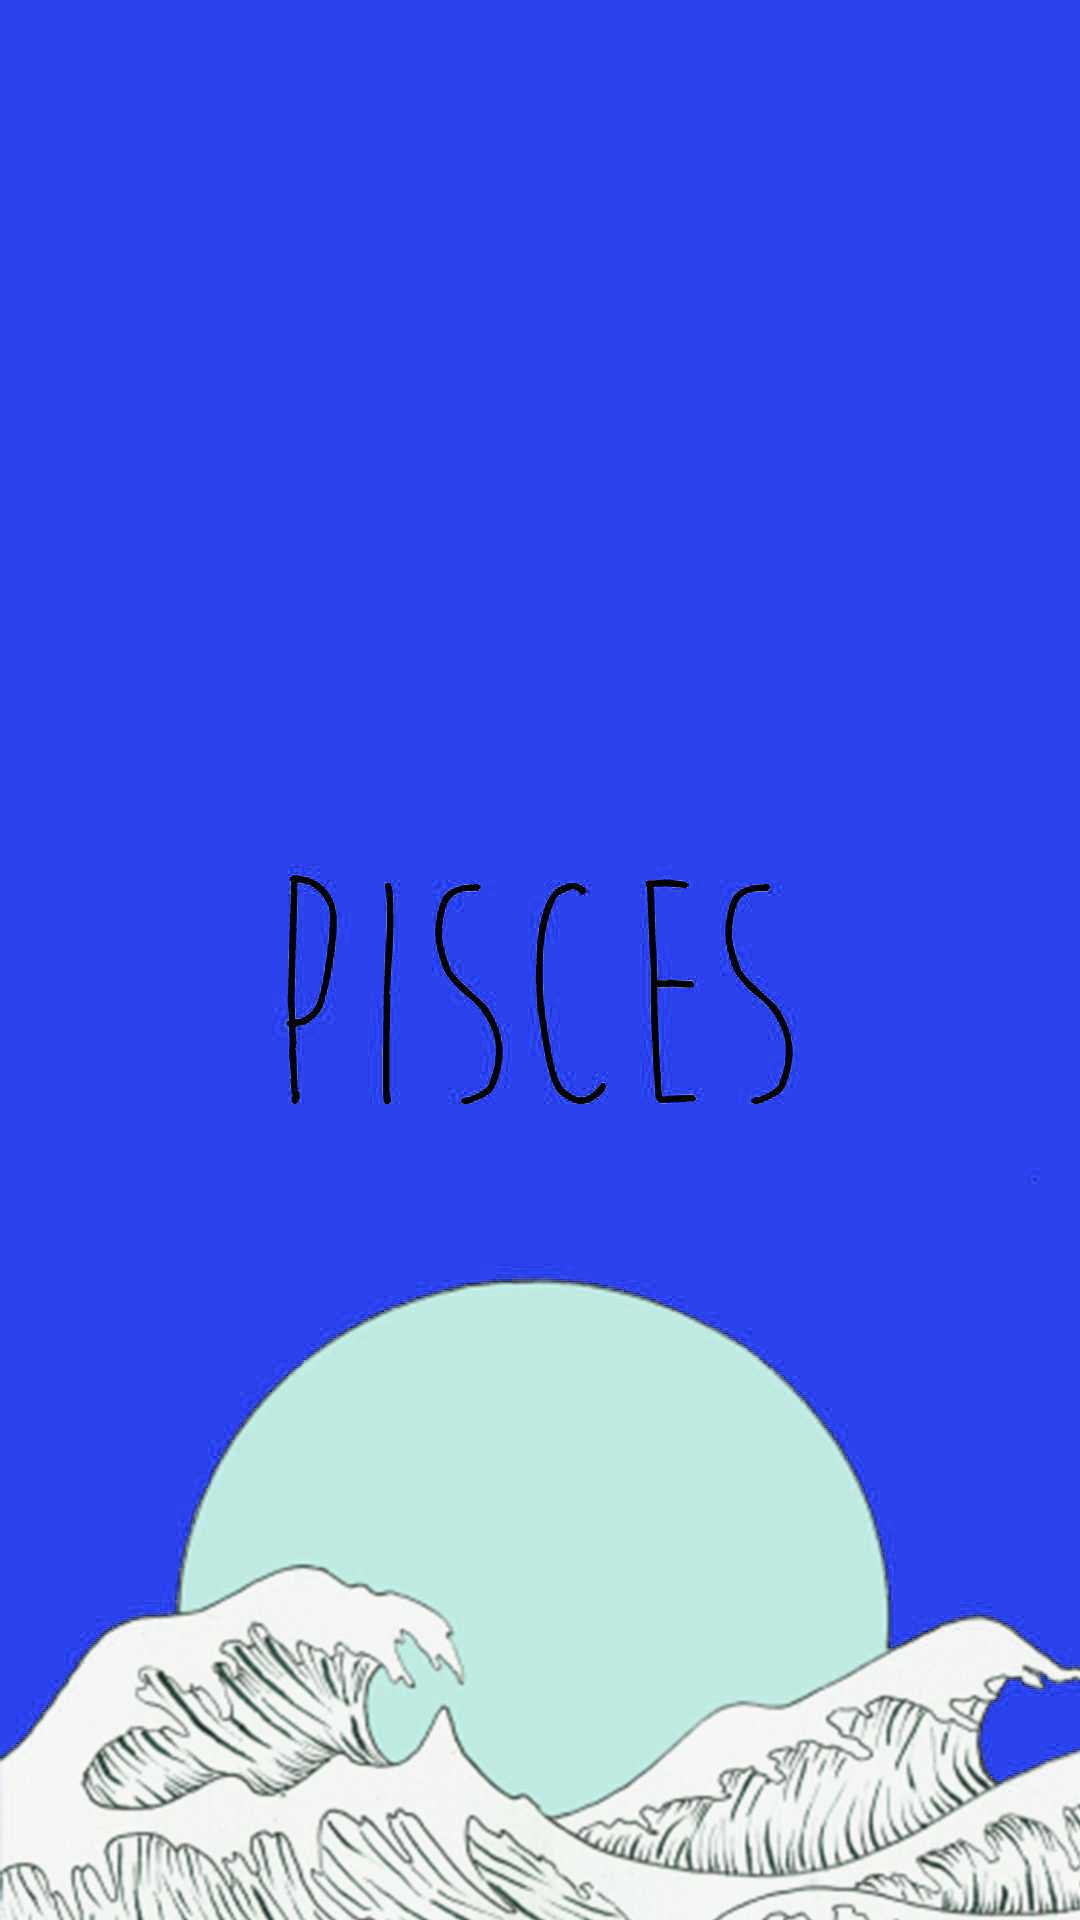 A poster of the zodiac sign pisces - Pisces